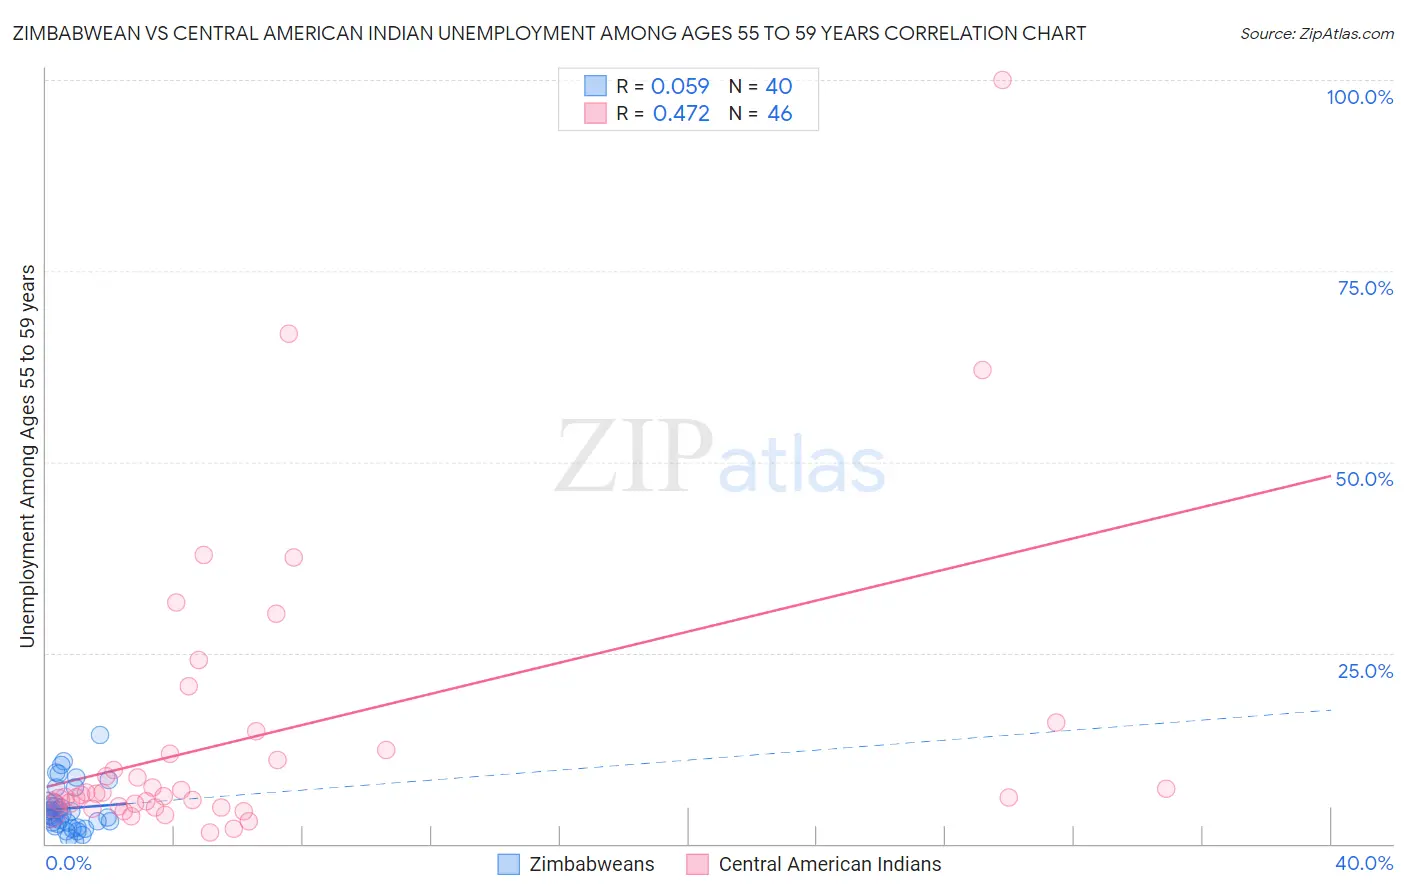 Zimbabwean vs Central American Indian Unemployment Among Ages 55 to 59 years